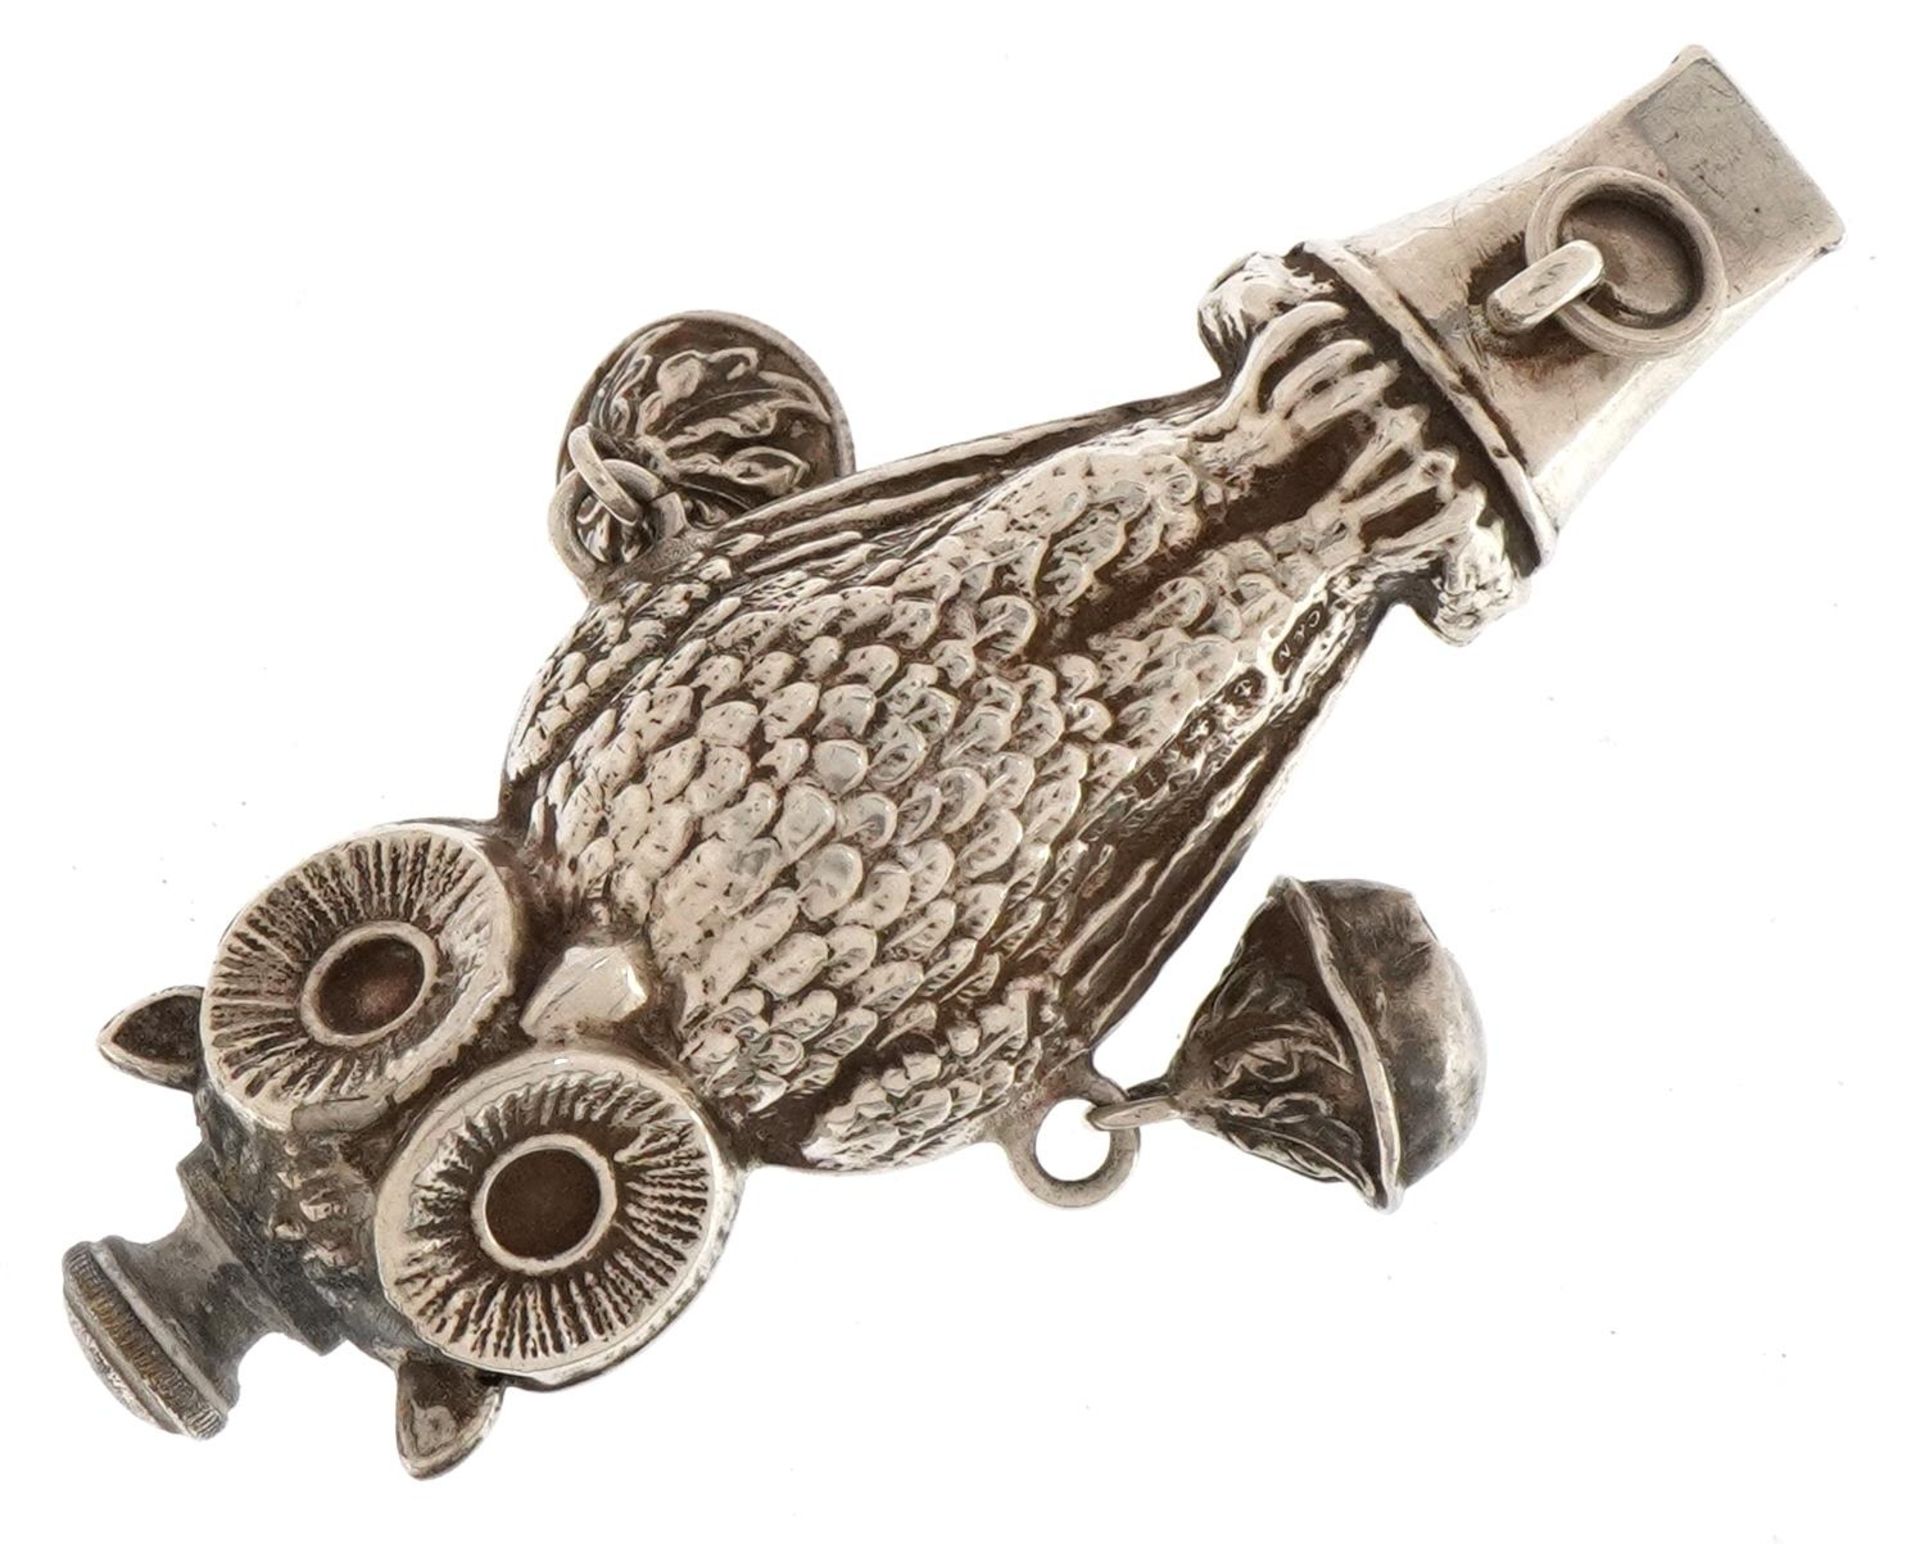 Crisford & Norris Ltd, Edwardian silver baby's rattle whistle in the form of an owl, Birmingham - Bild 2 aus 3